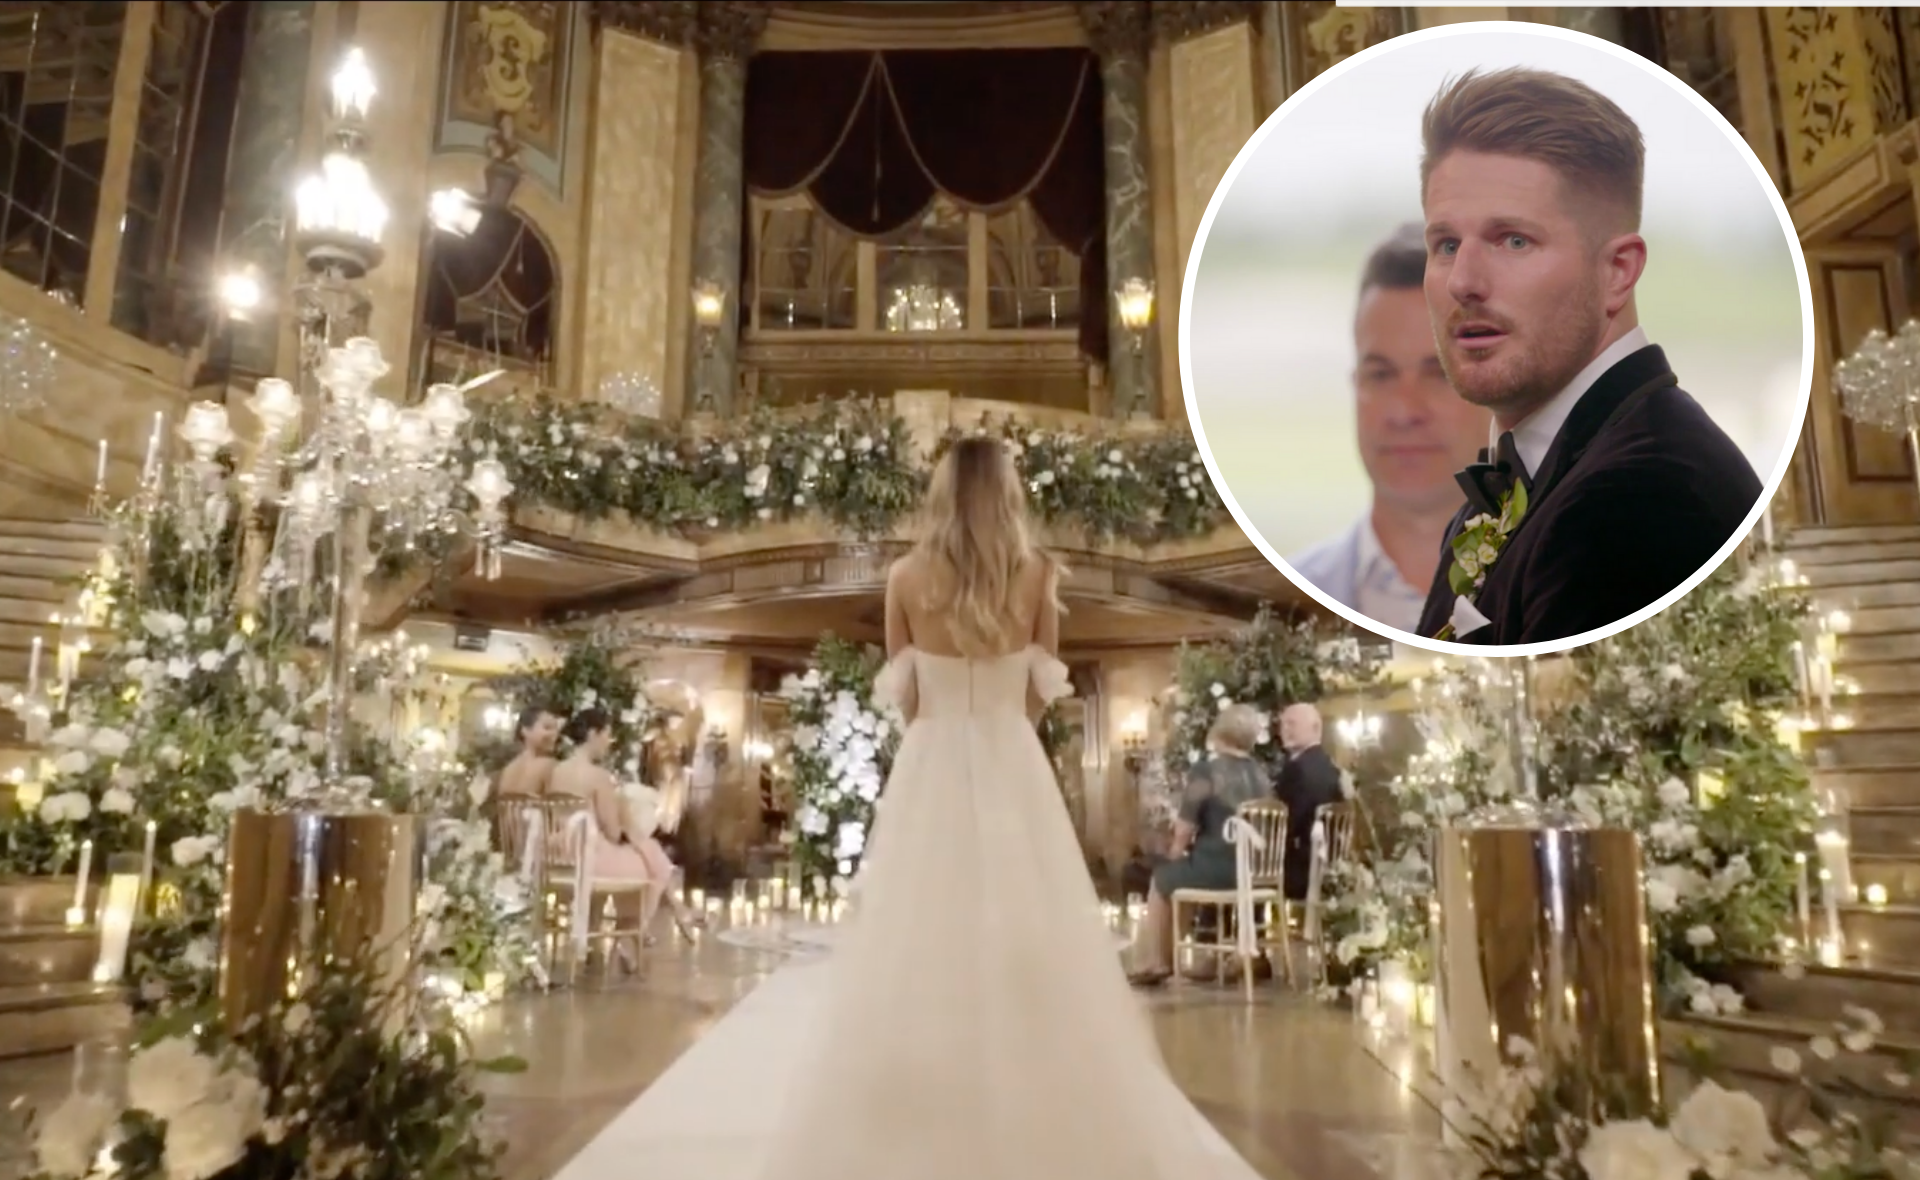 From three hour vows to unexpected quarantines: These are the shocking secrets from behind the scenes of the MAFS weddings